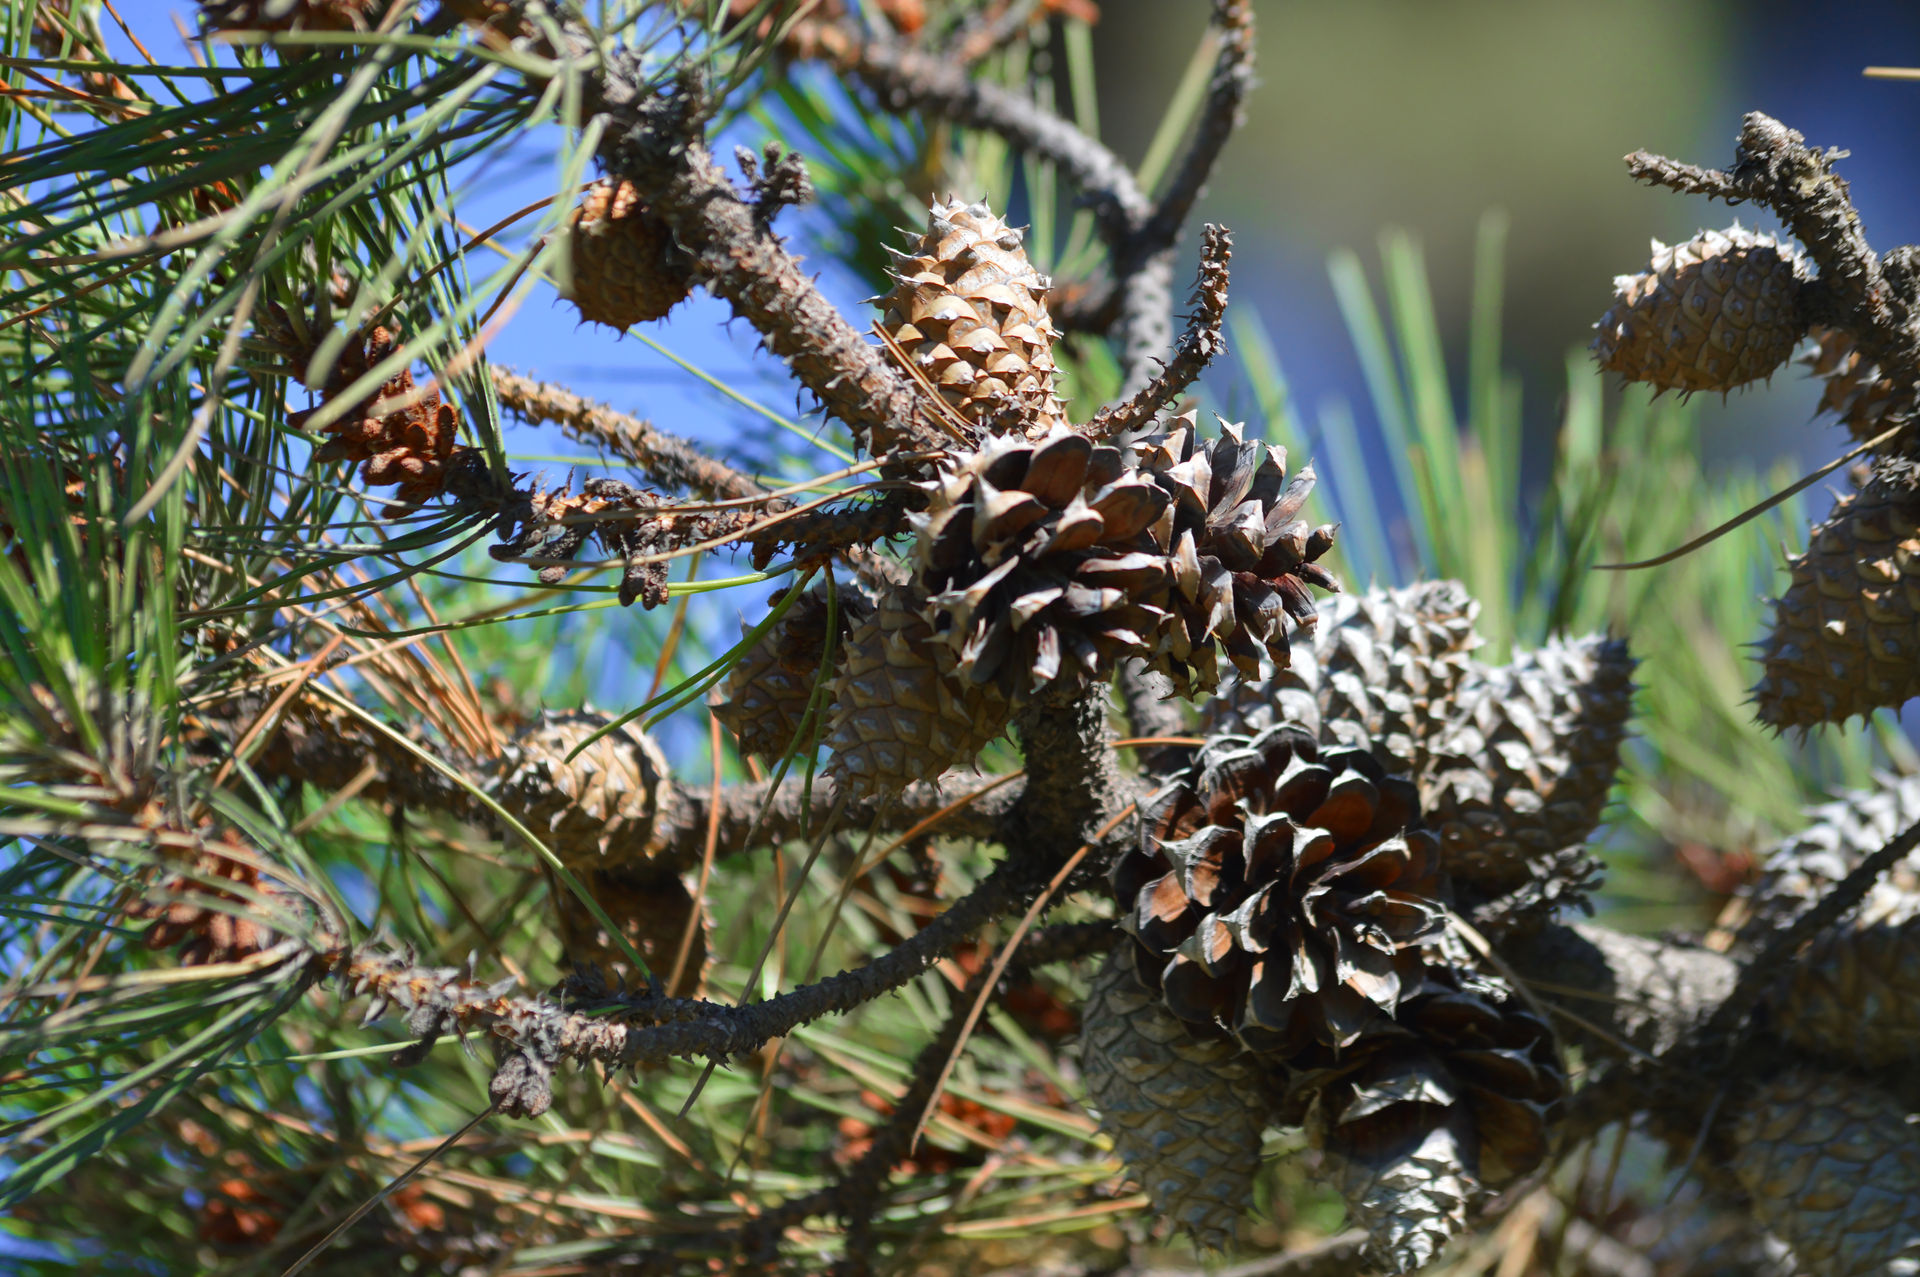 Small Pine Cones by LevinLetLive on DeviantArt